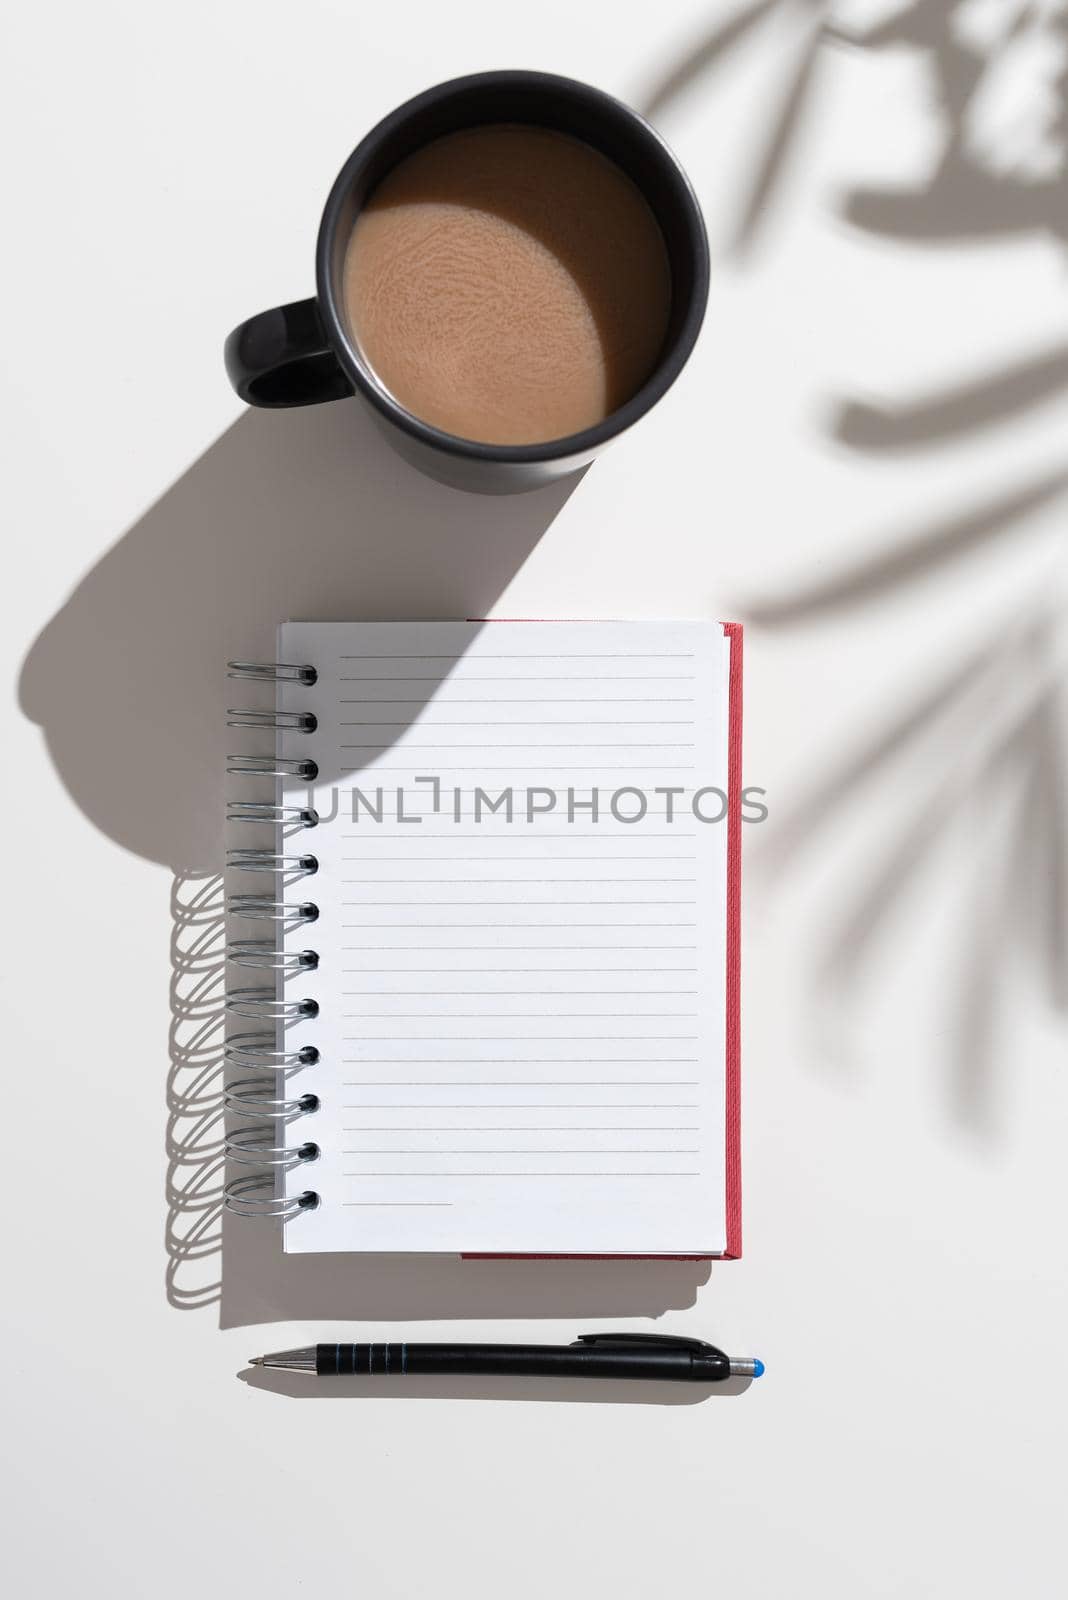 Notebook With Important Messages On Desk With Coffee And Pen. Crutial Informations Written On Pad On Table With Cup And Pencil. Late Updates Presented. by nialowwa